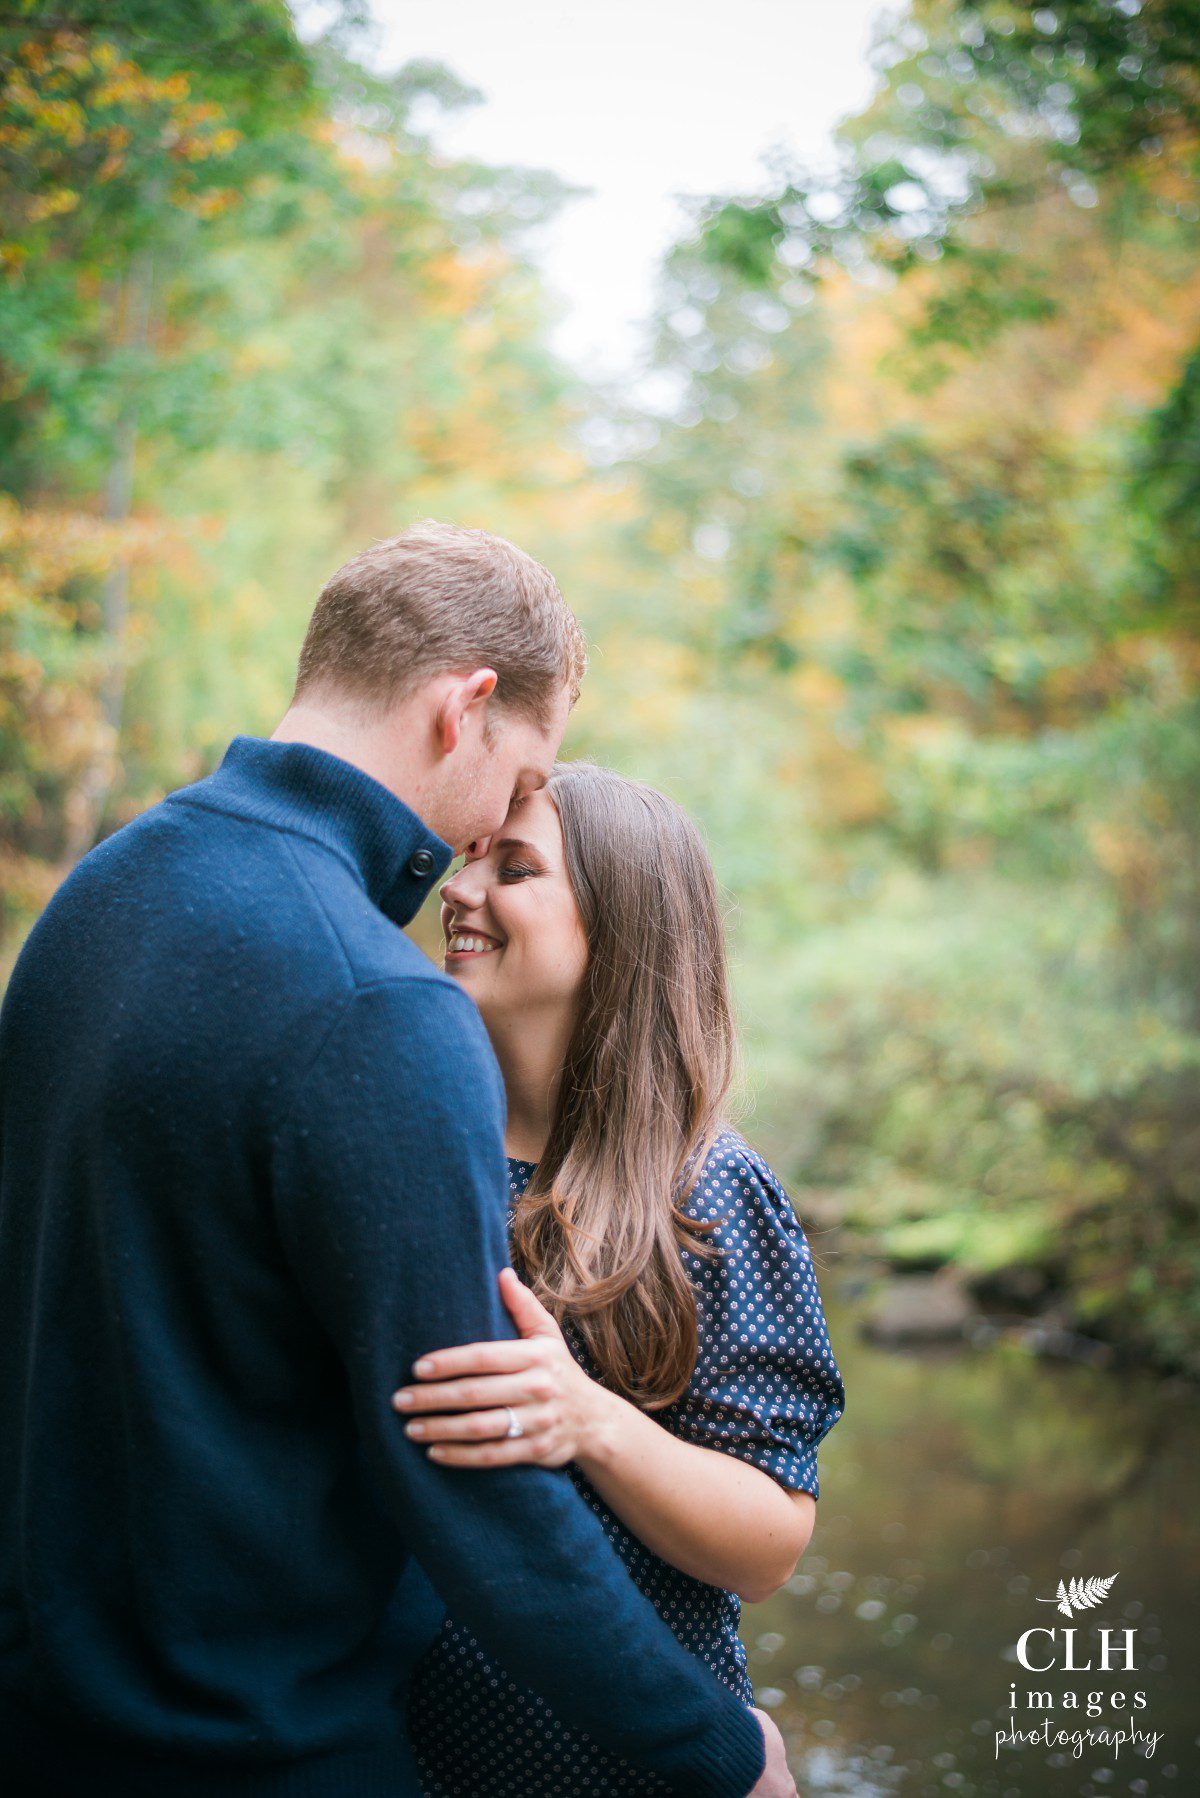 clh-images-photography-saratoga-engagement-photography-capital-district-engagement-photography-saratoga-state-park-photography-amy-and-matt-engagement-photos-9